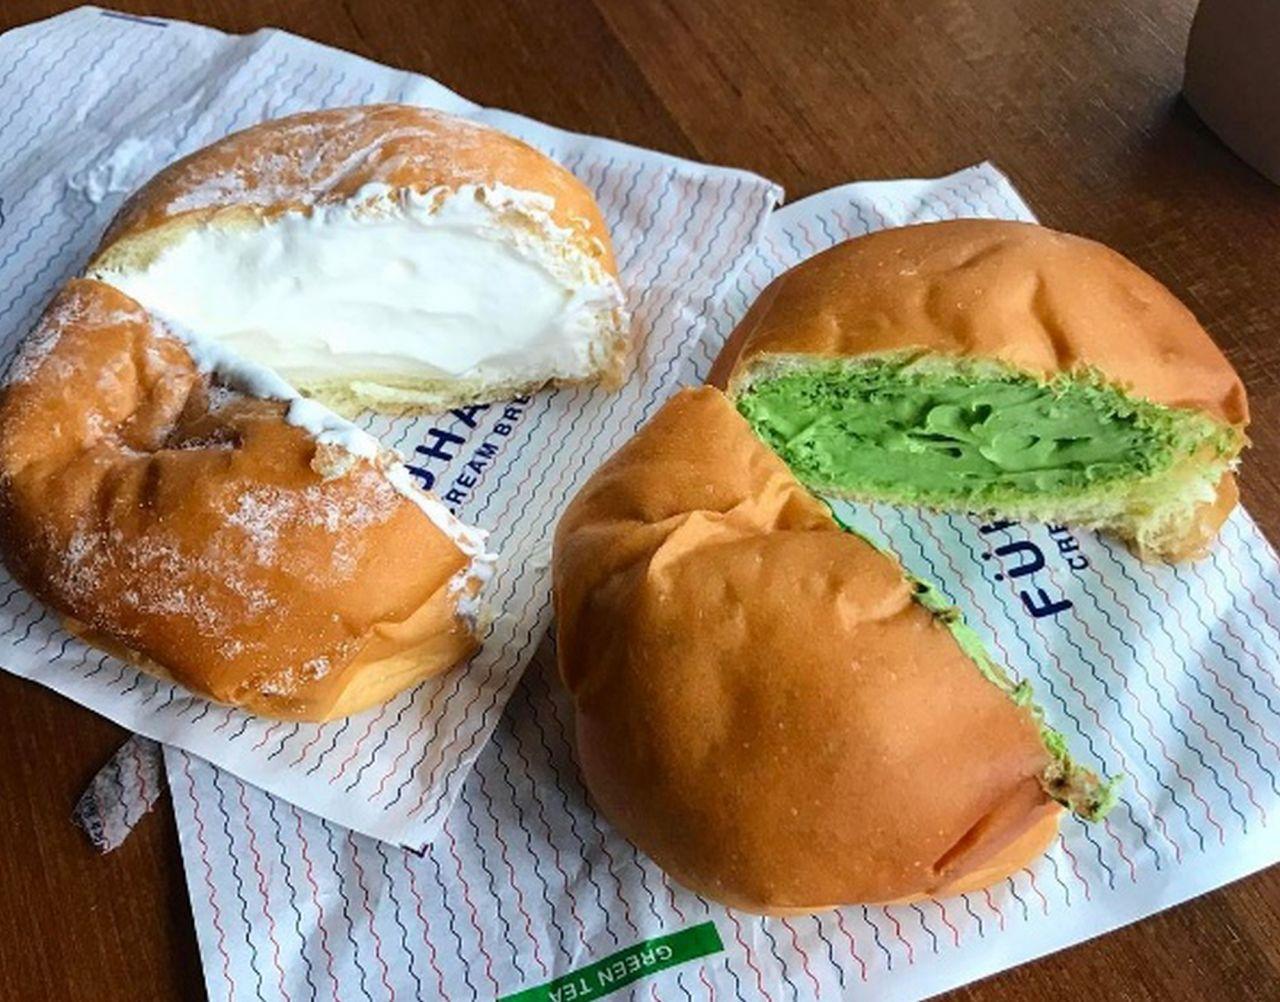 A delicious cream-filled bun from a Korean bakery, perfect for a quick meal or snack.